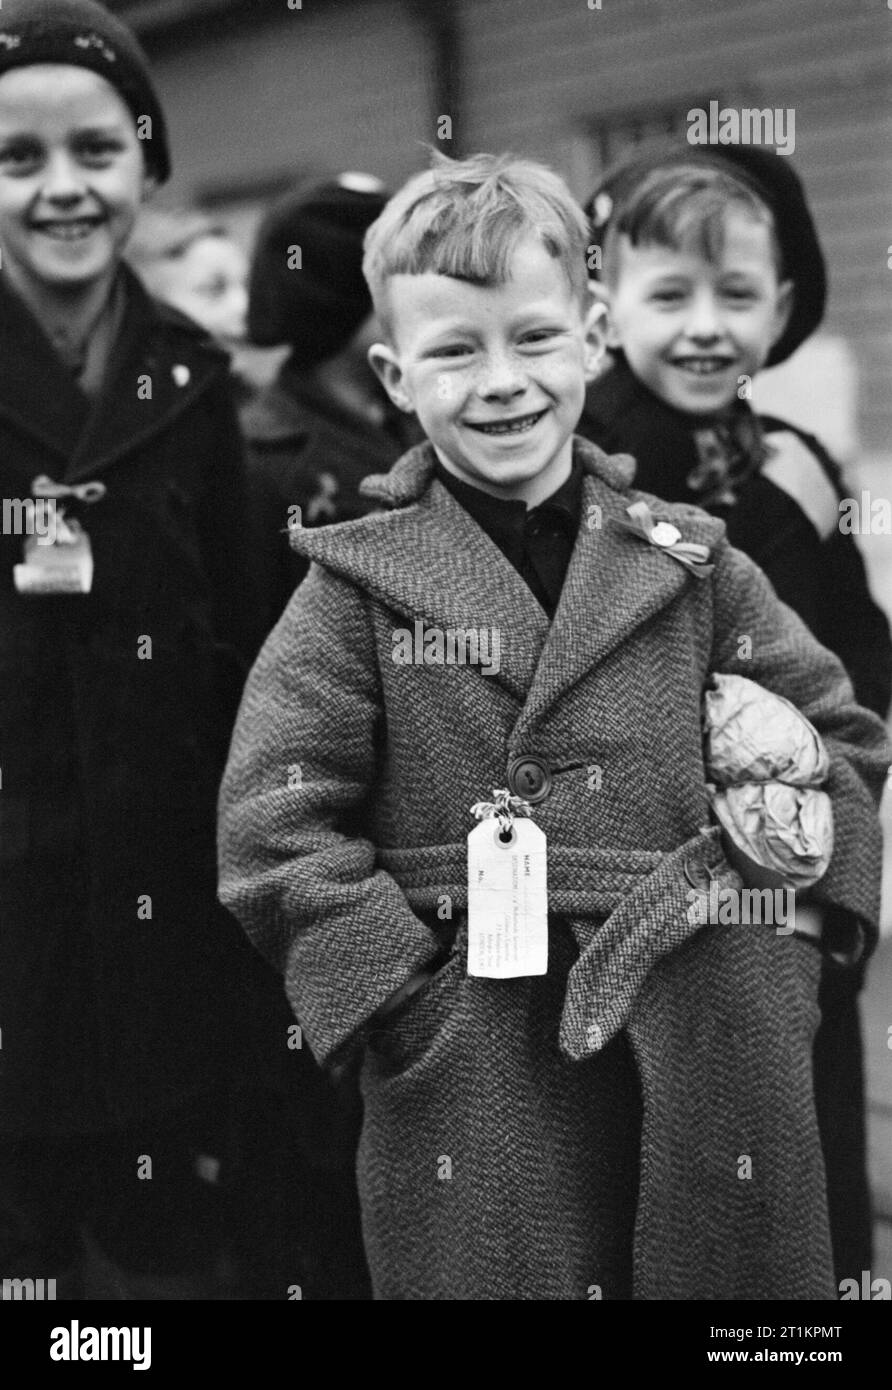 A Dutch refugee arrives at Tilbury in Essex during 1945. A small Dutch boy smiles for the camera upon arrival at Tilbury in Essex. He is carrying a small paper parcel under his arm, which contains all his luggage. He, and the other children, (some of whom can be seen behind him) all have labels pinned to their coats which bear their names, home address and destination. Stock Photo